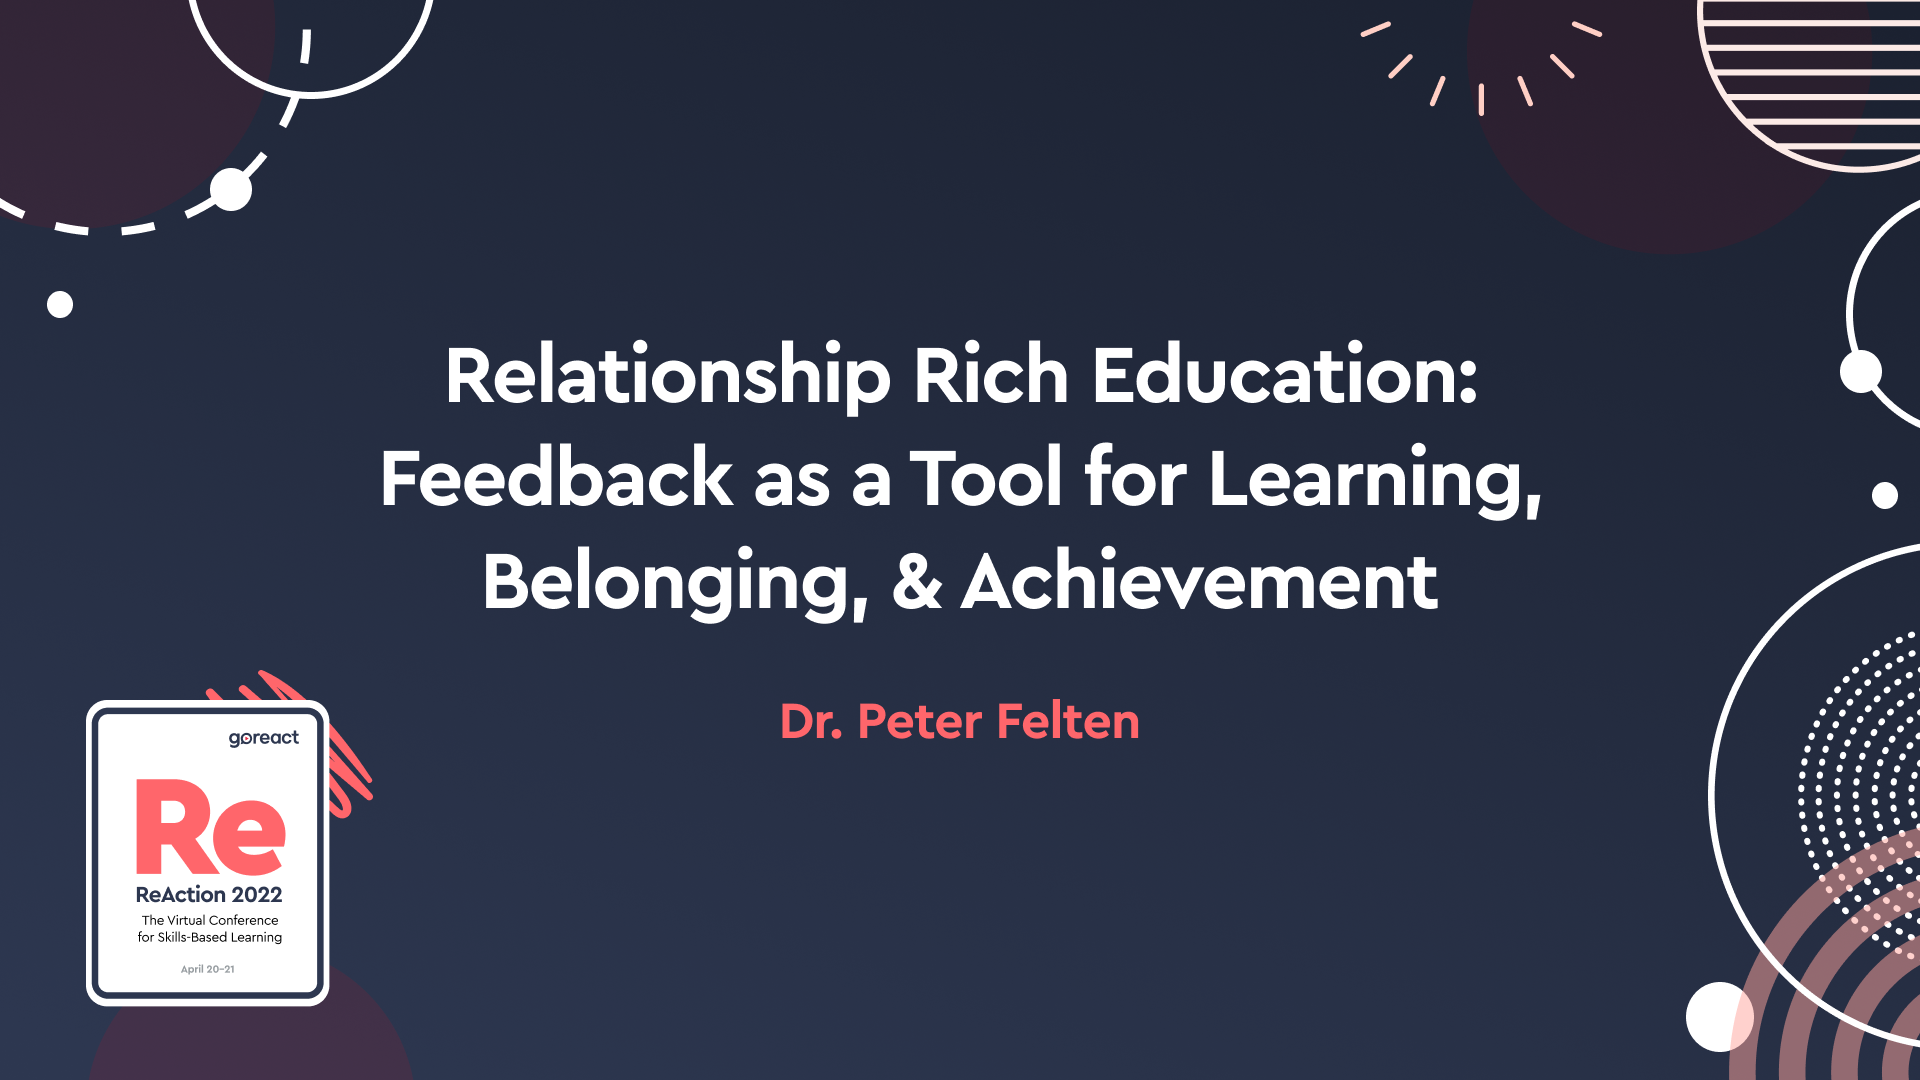 Relationship Rich Education: Feedback as a Tool for Learning, Belonging, & Achievement